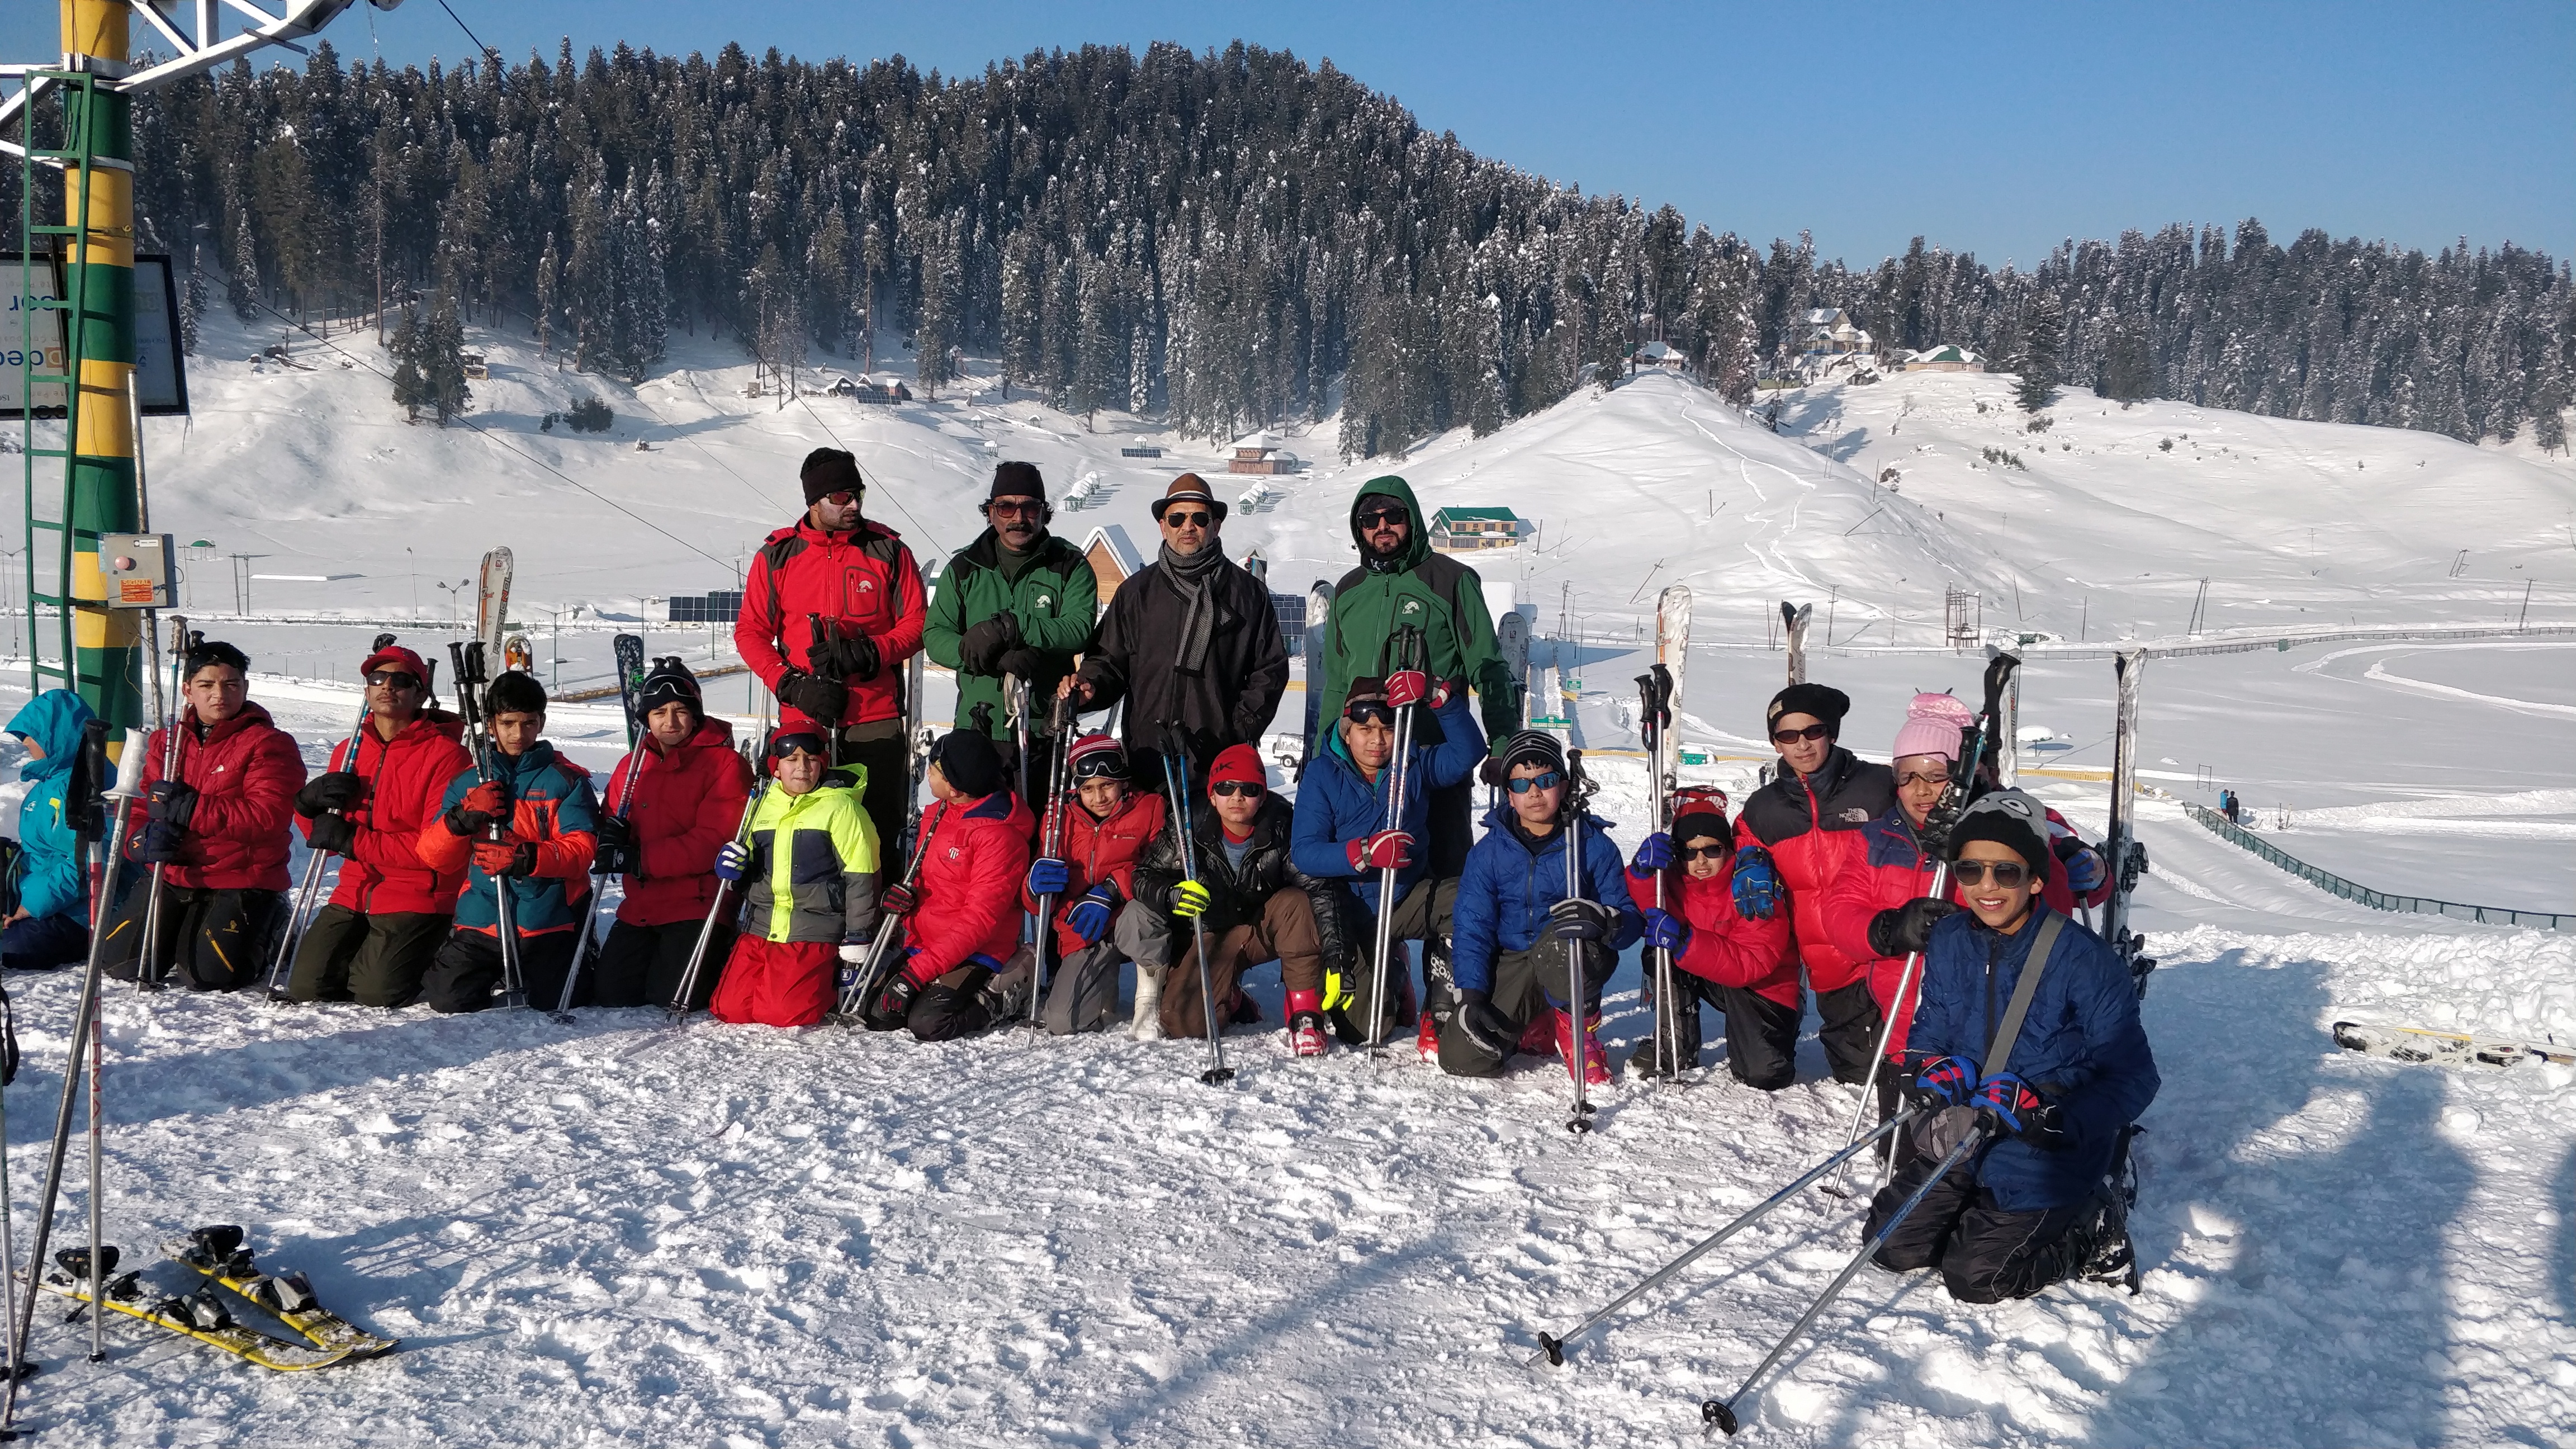 9th Annual Snow Skiing Course at Gulmarg-2019